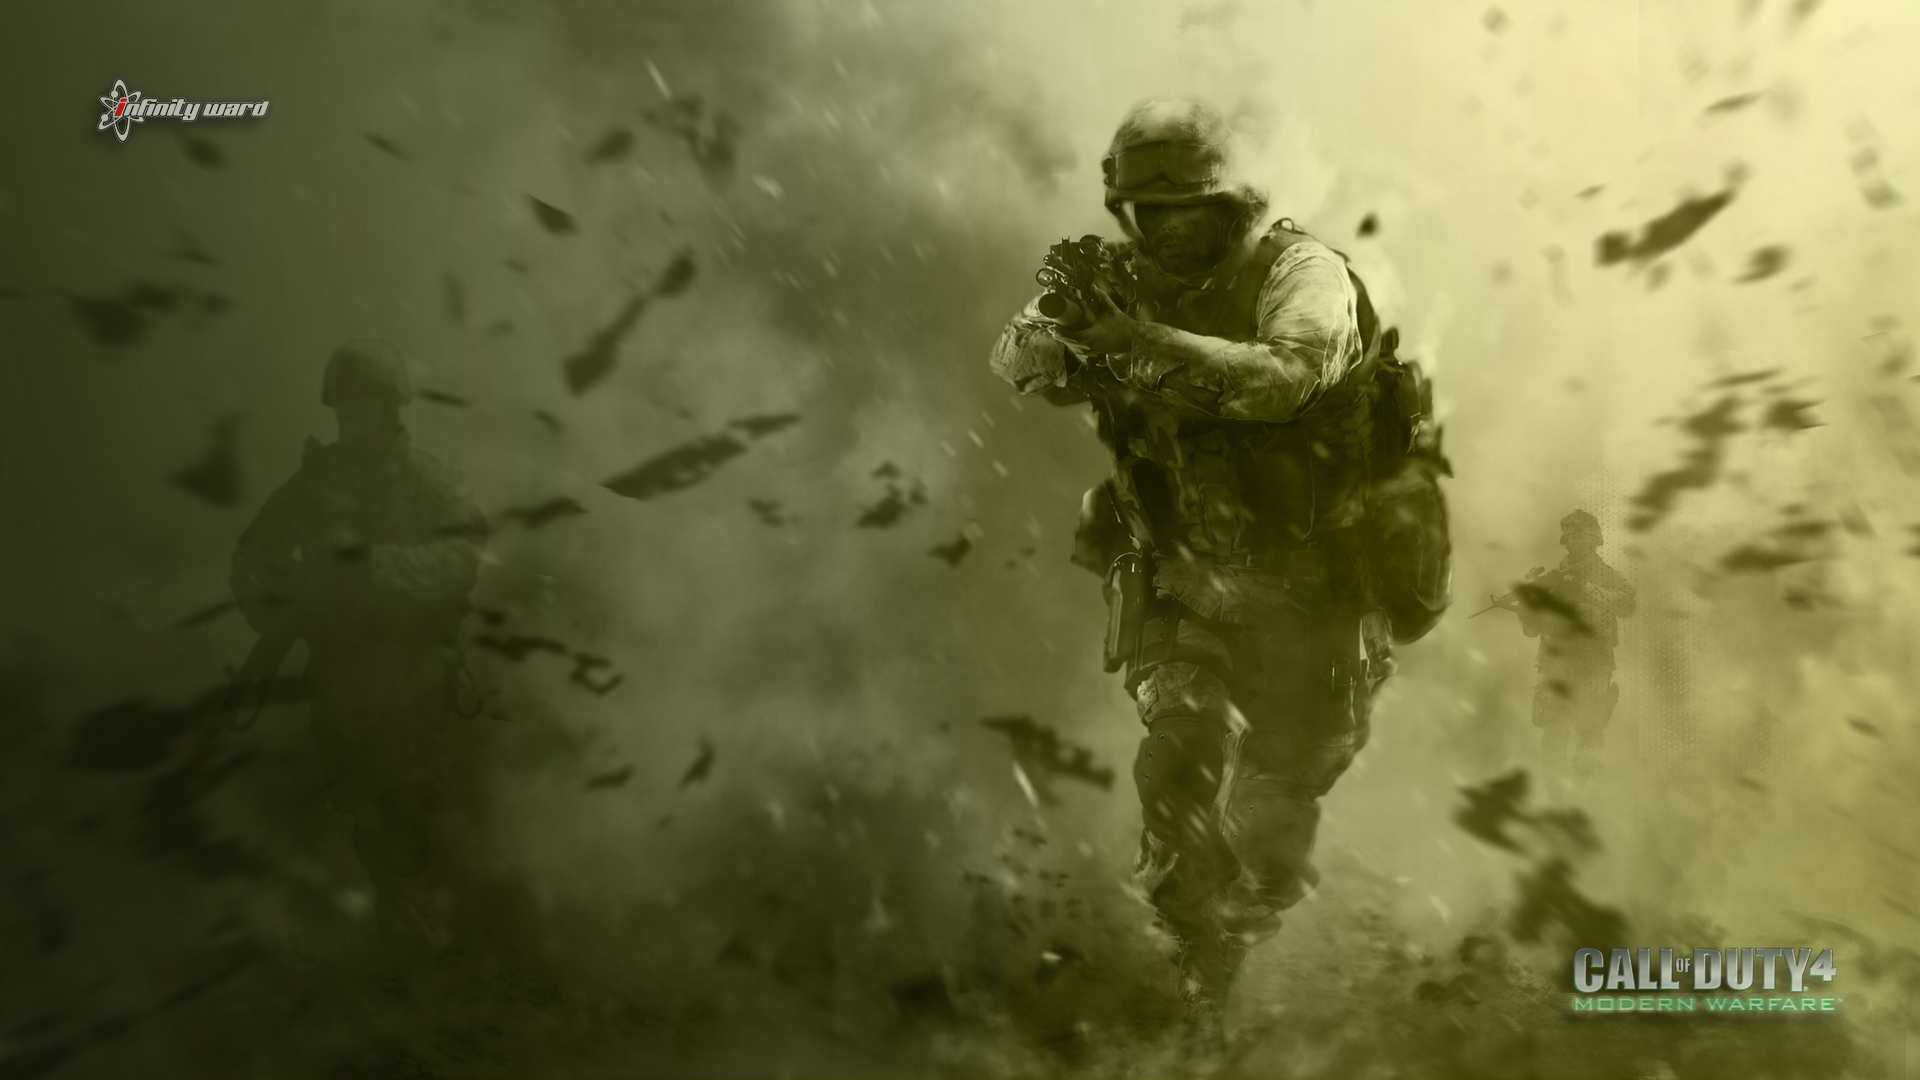 Image - Call Of Duty 4 Wallpaper 28159.png - Call of Duty Wiki - Wikia